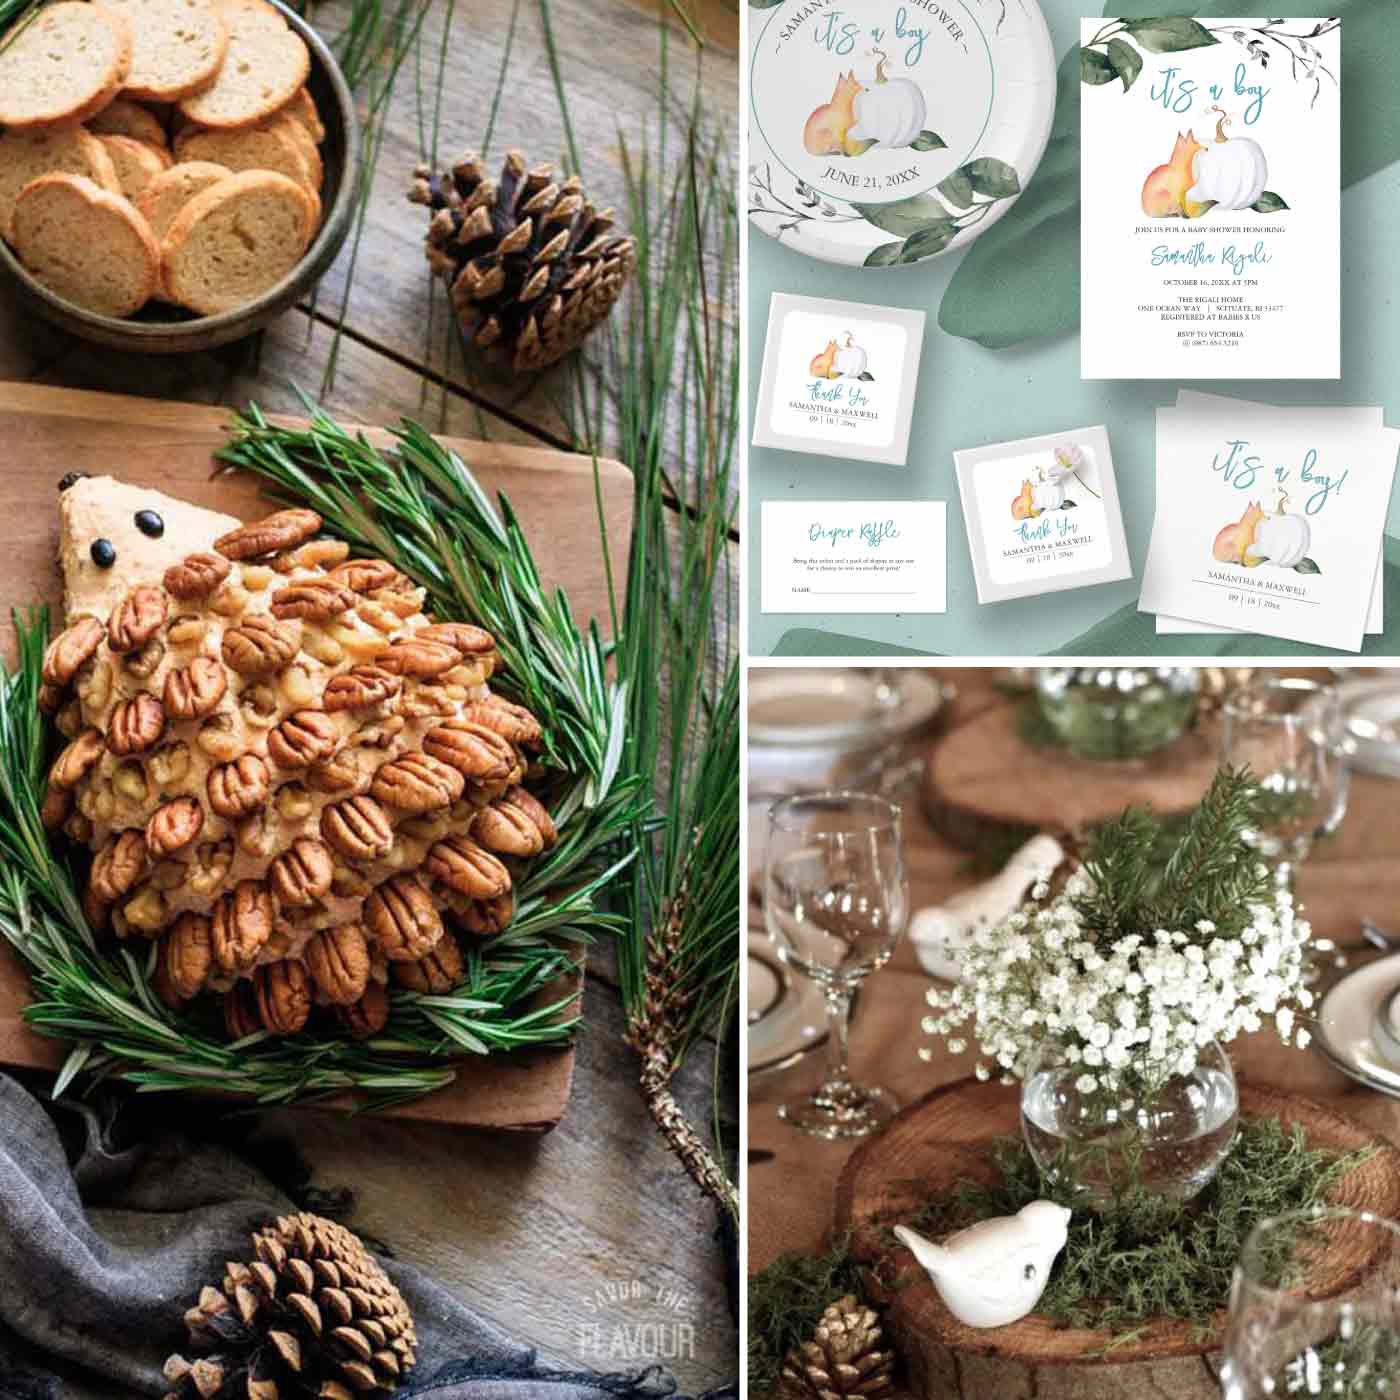 Woodland themed baby shower ideas